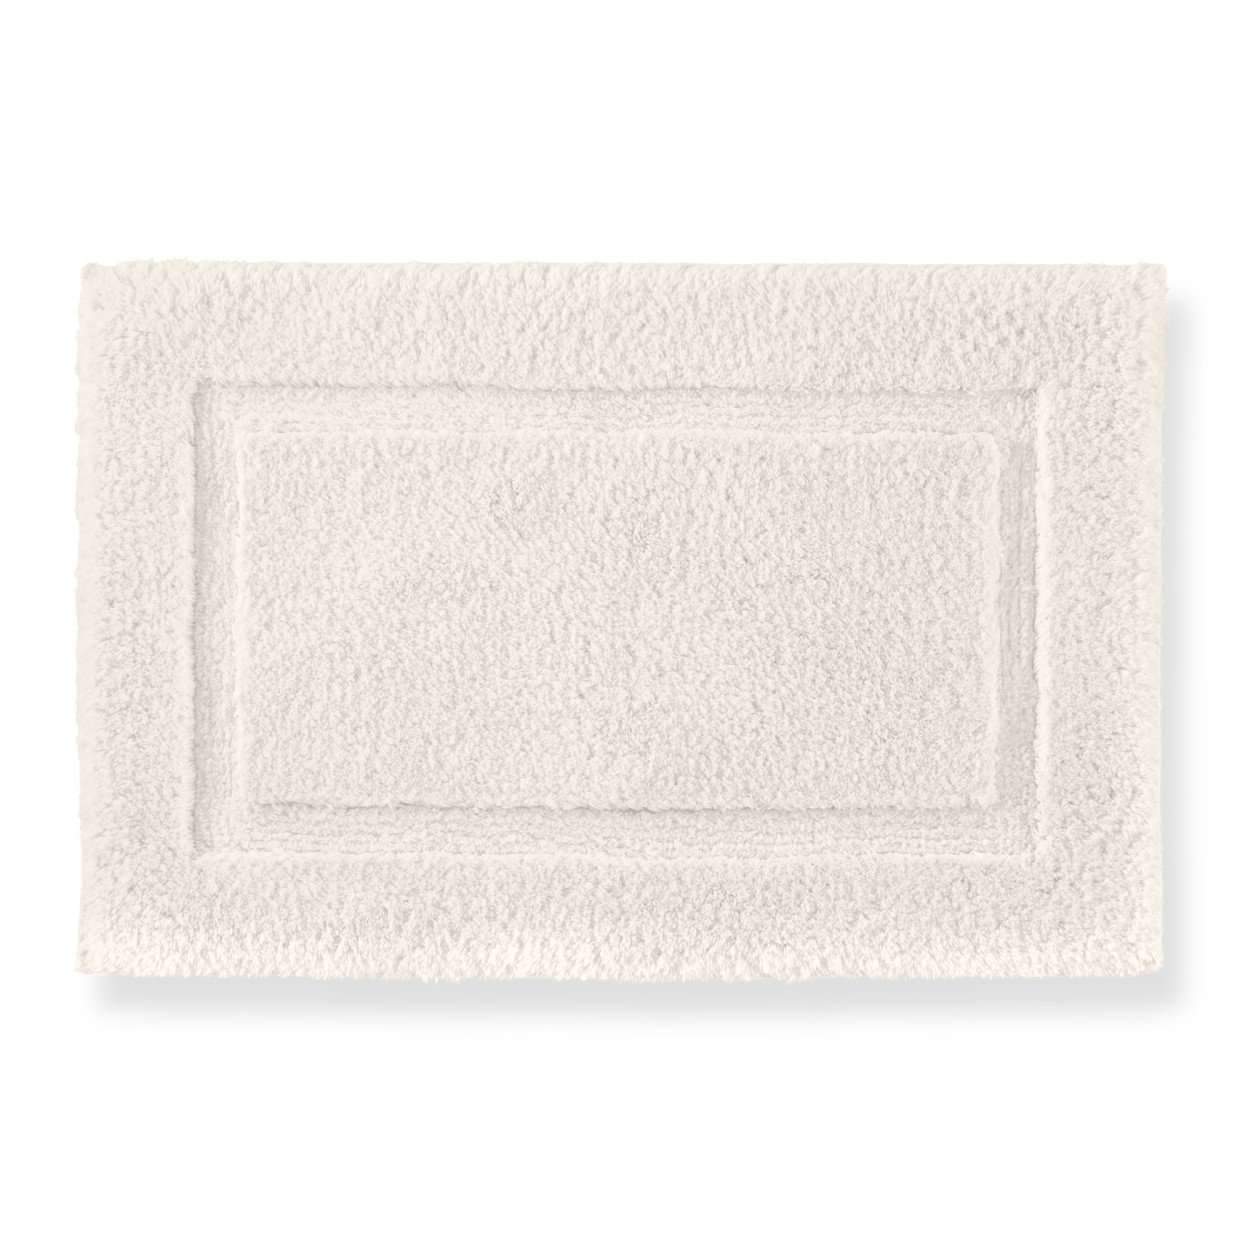 Mats & Rugs Tiffany Bath Rug by Peacock Alley Small 20x31 / Ivory Peacock Alley